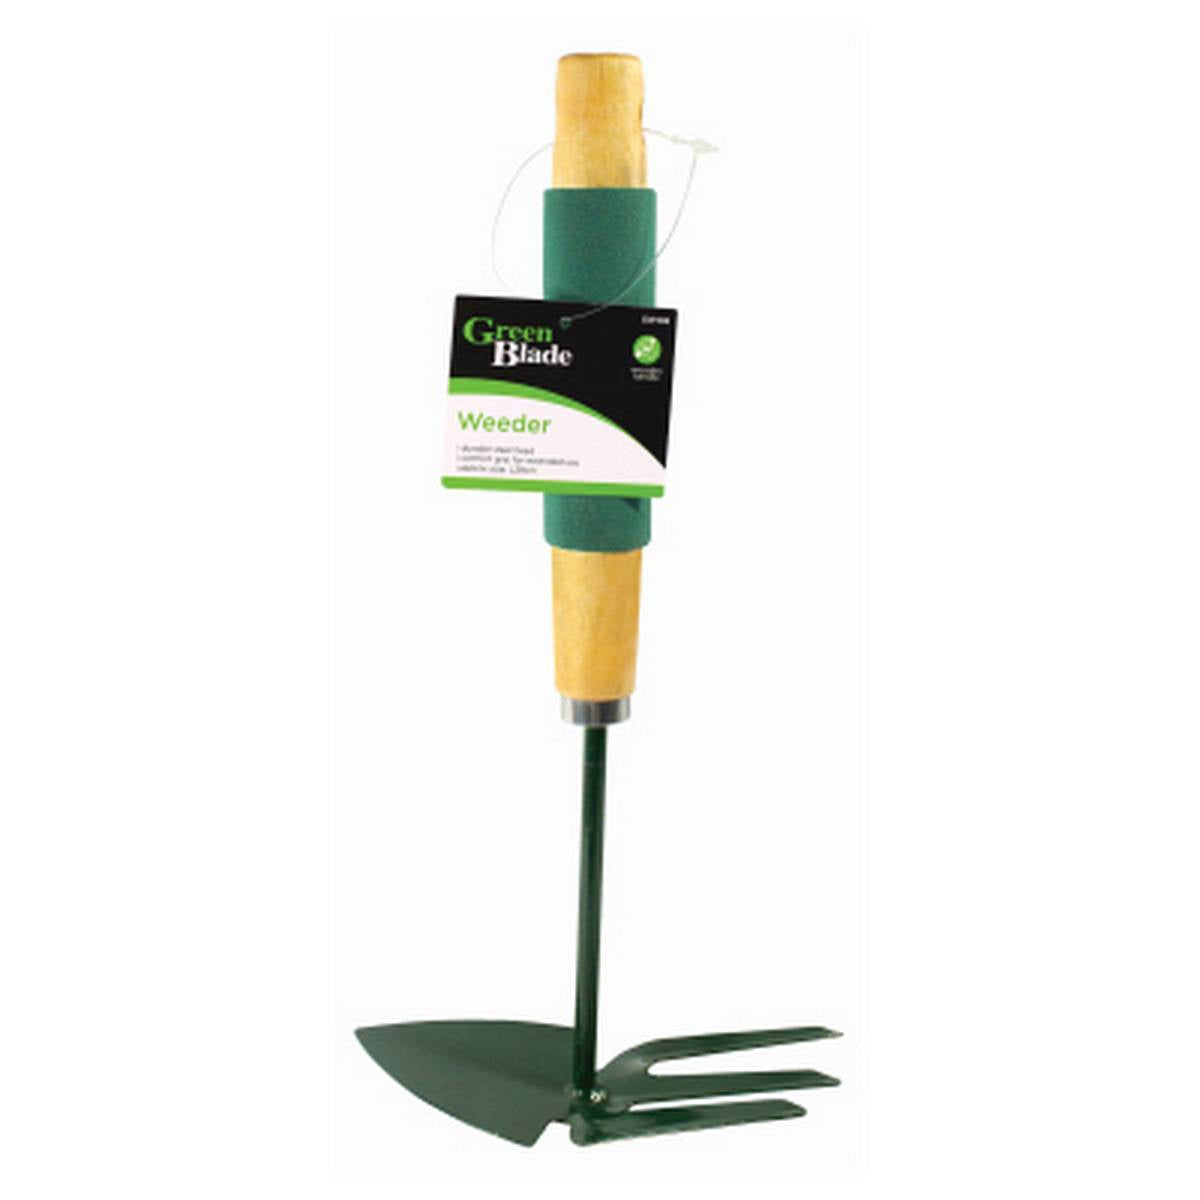 GREENBLADE GREEN BLADE WEEDER WITH CUSHION GRIP WOODEN HANDLE BB-GW108